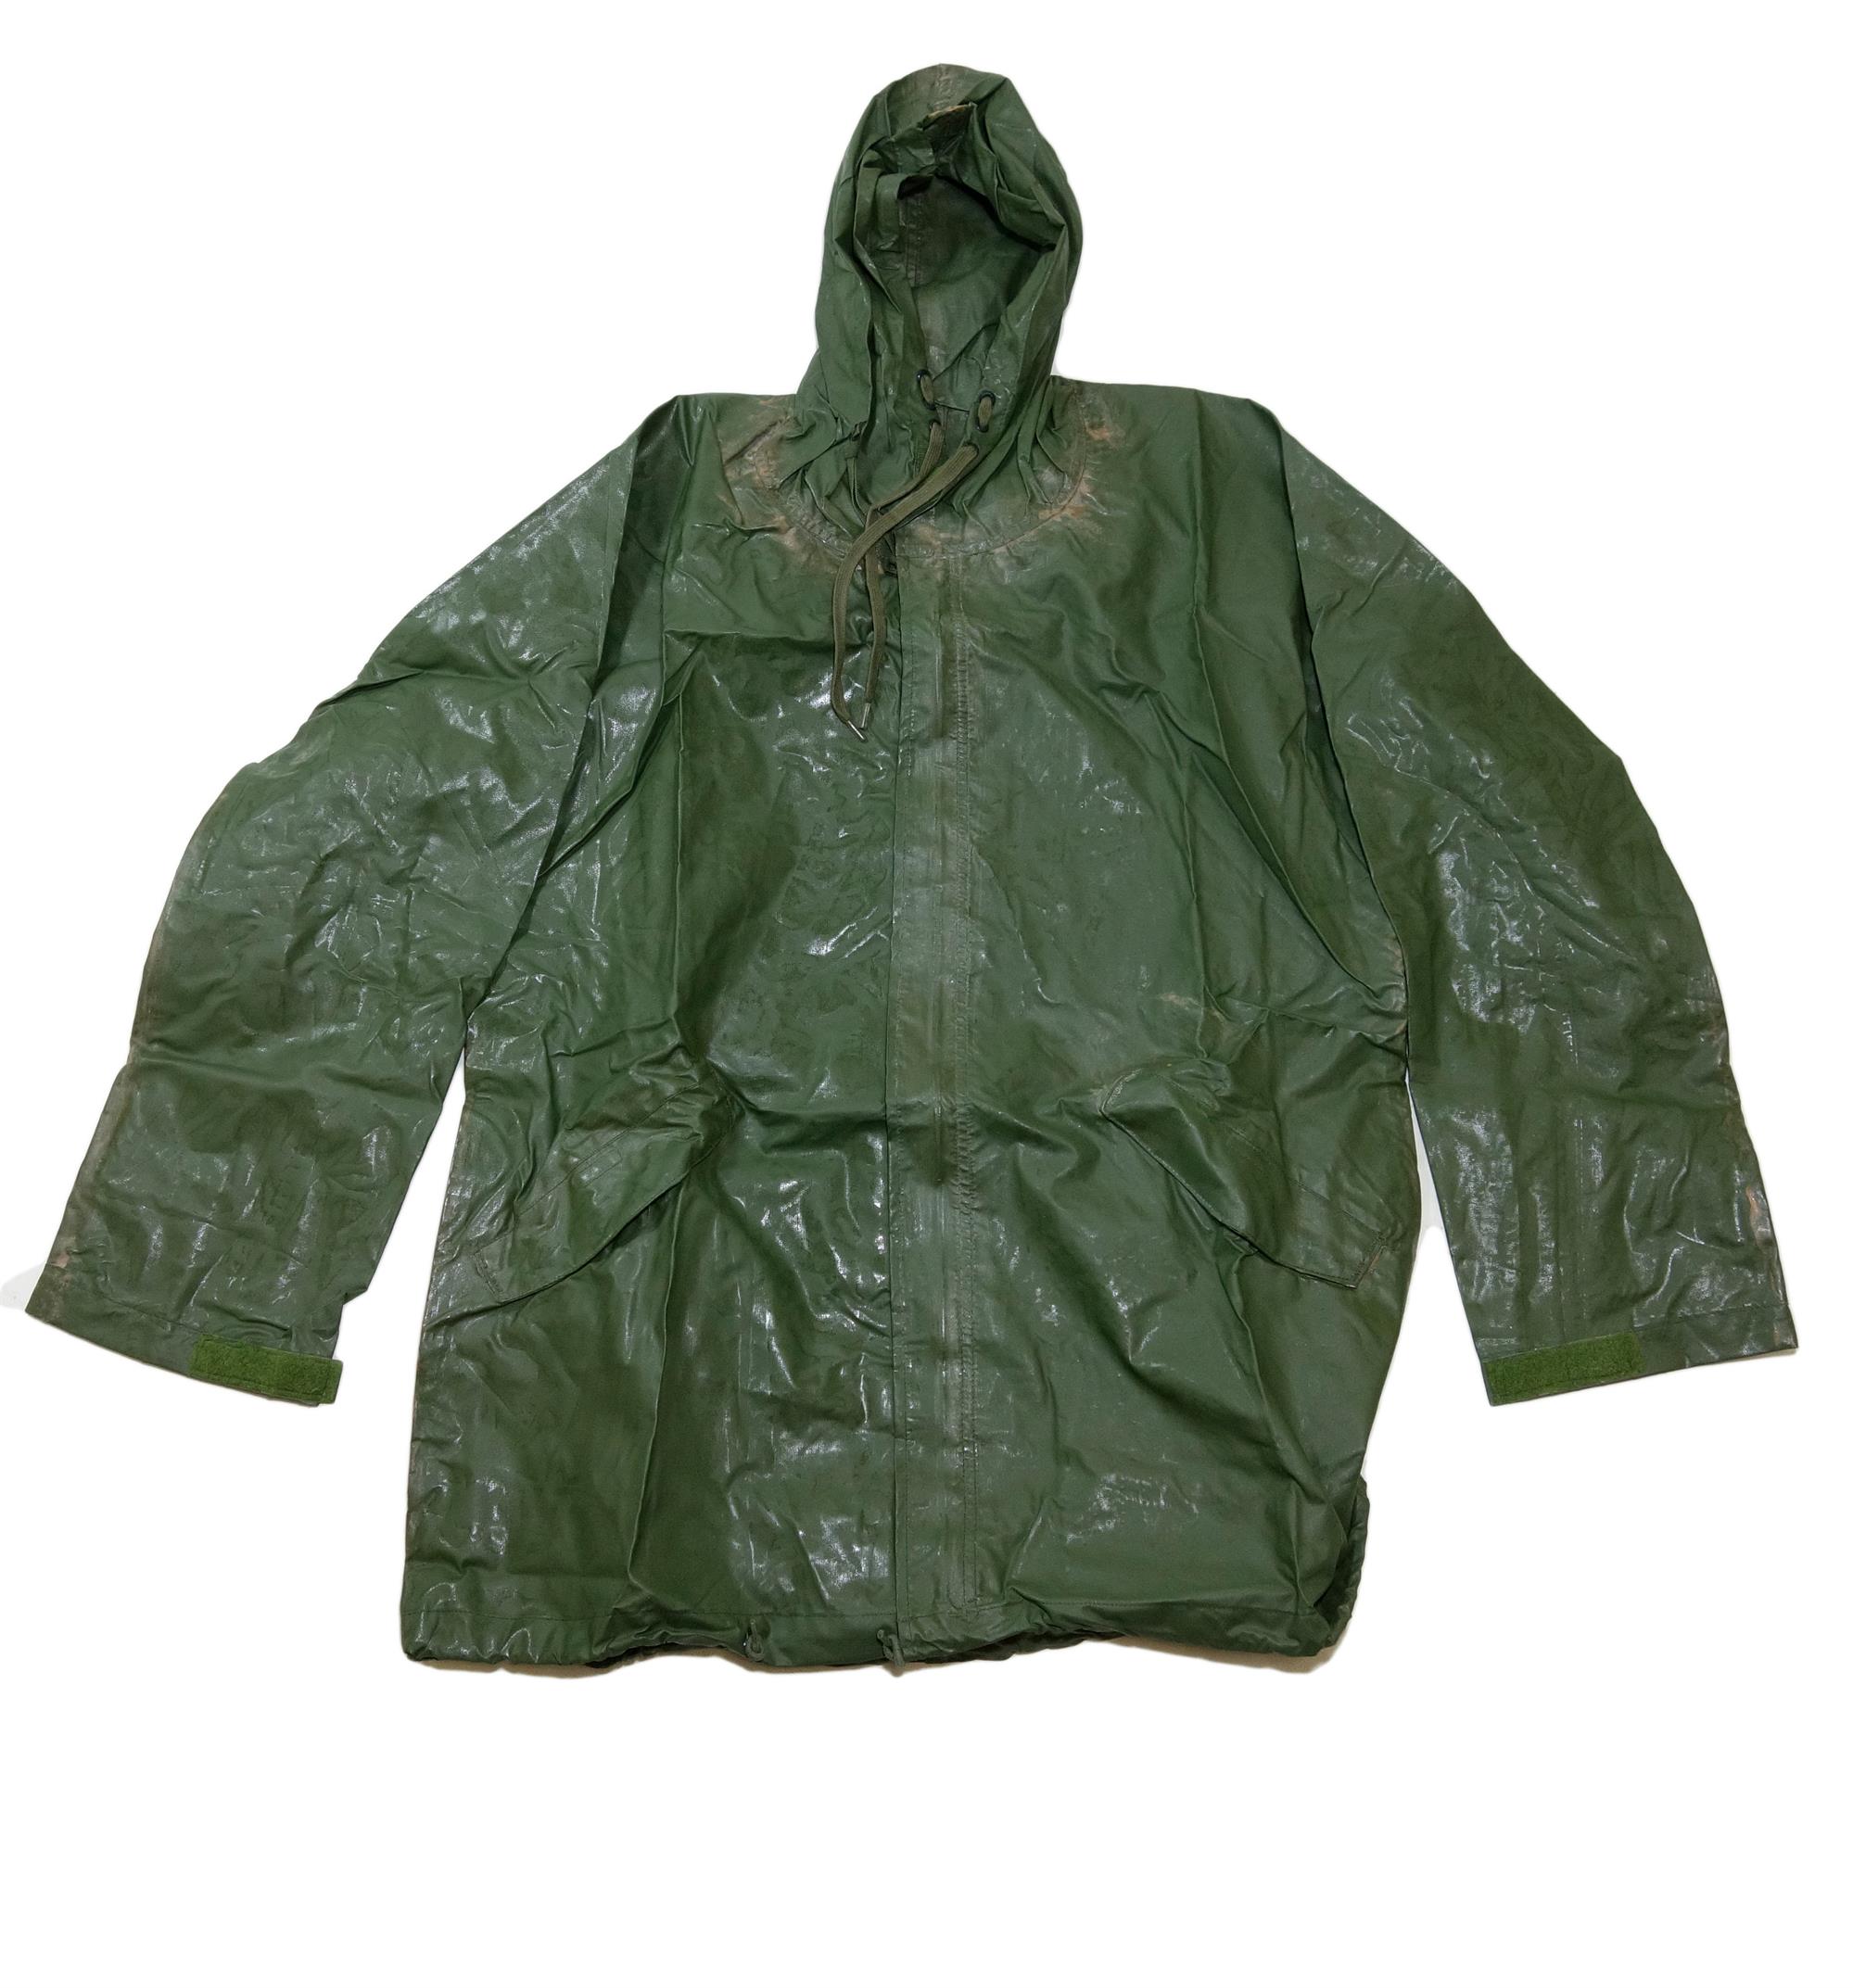 Army Wet Weather Parka - Army Military